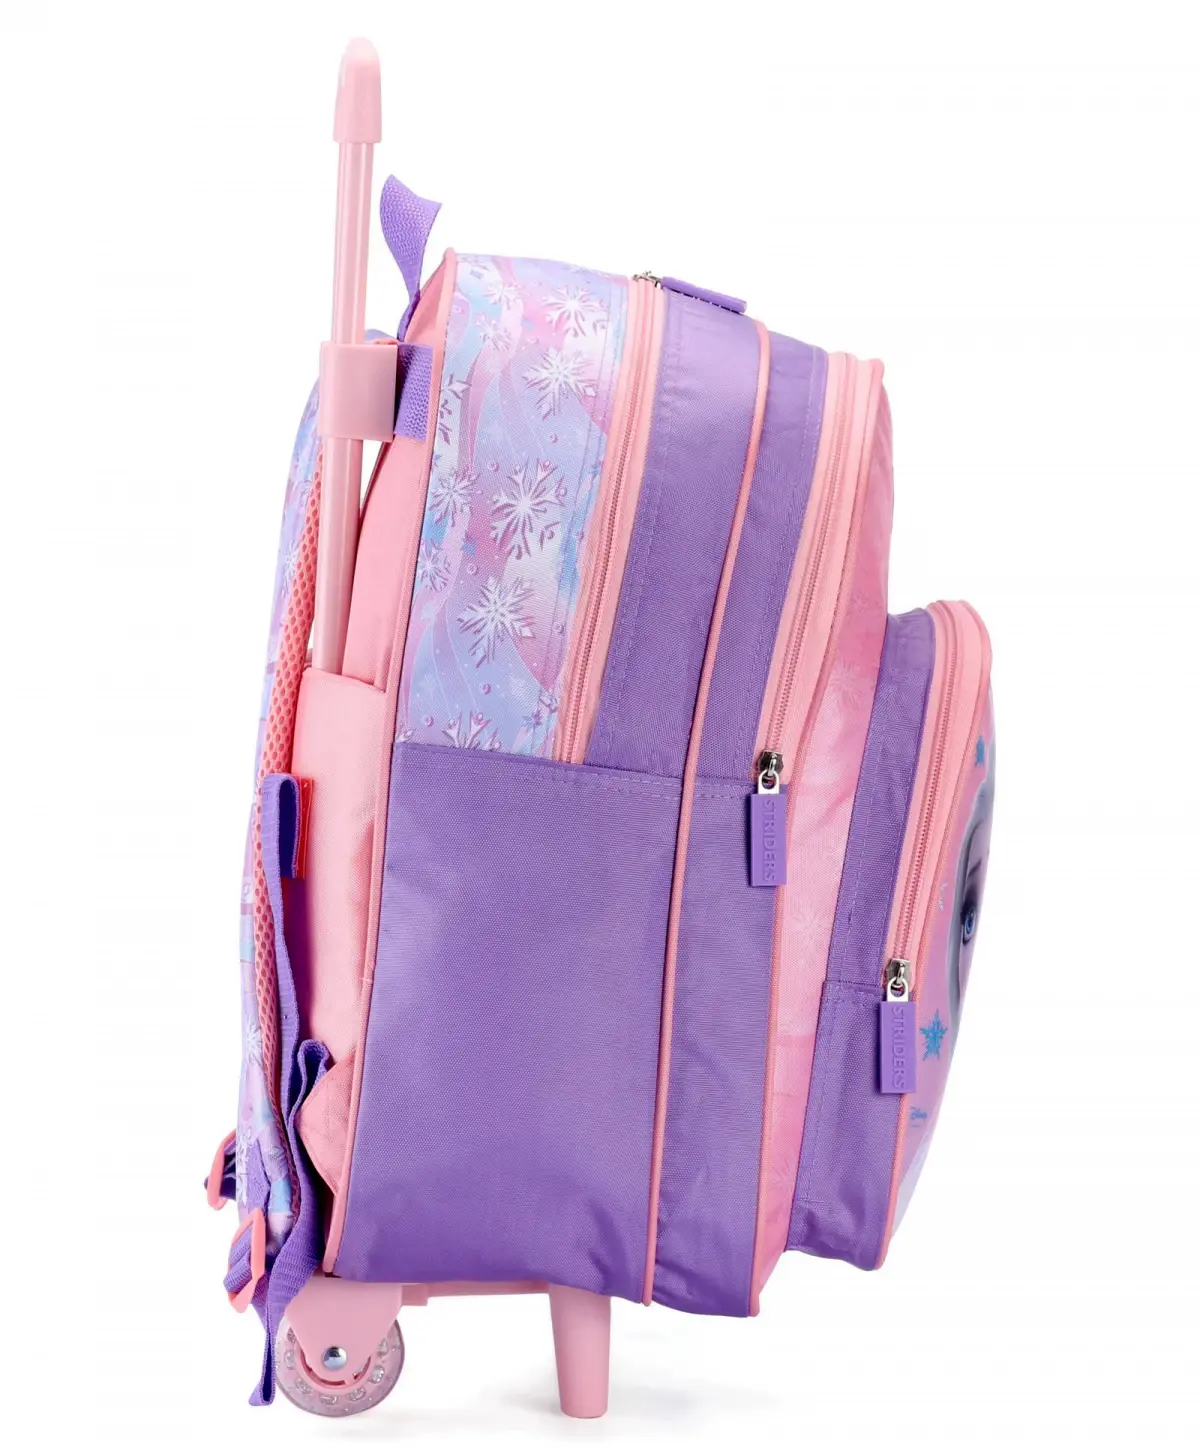 Striders 16 inches Frozen-Inspired School Trolley Bag for Winter Wonderland Adventures  Multicolor For Kids Ages 6Y+